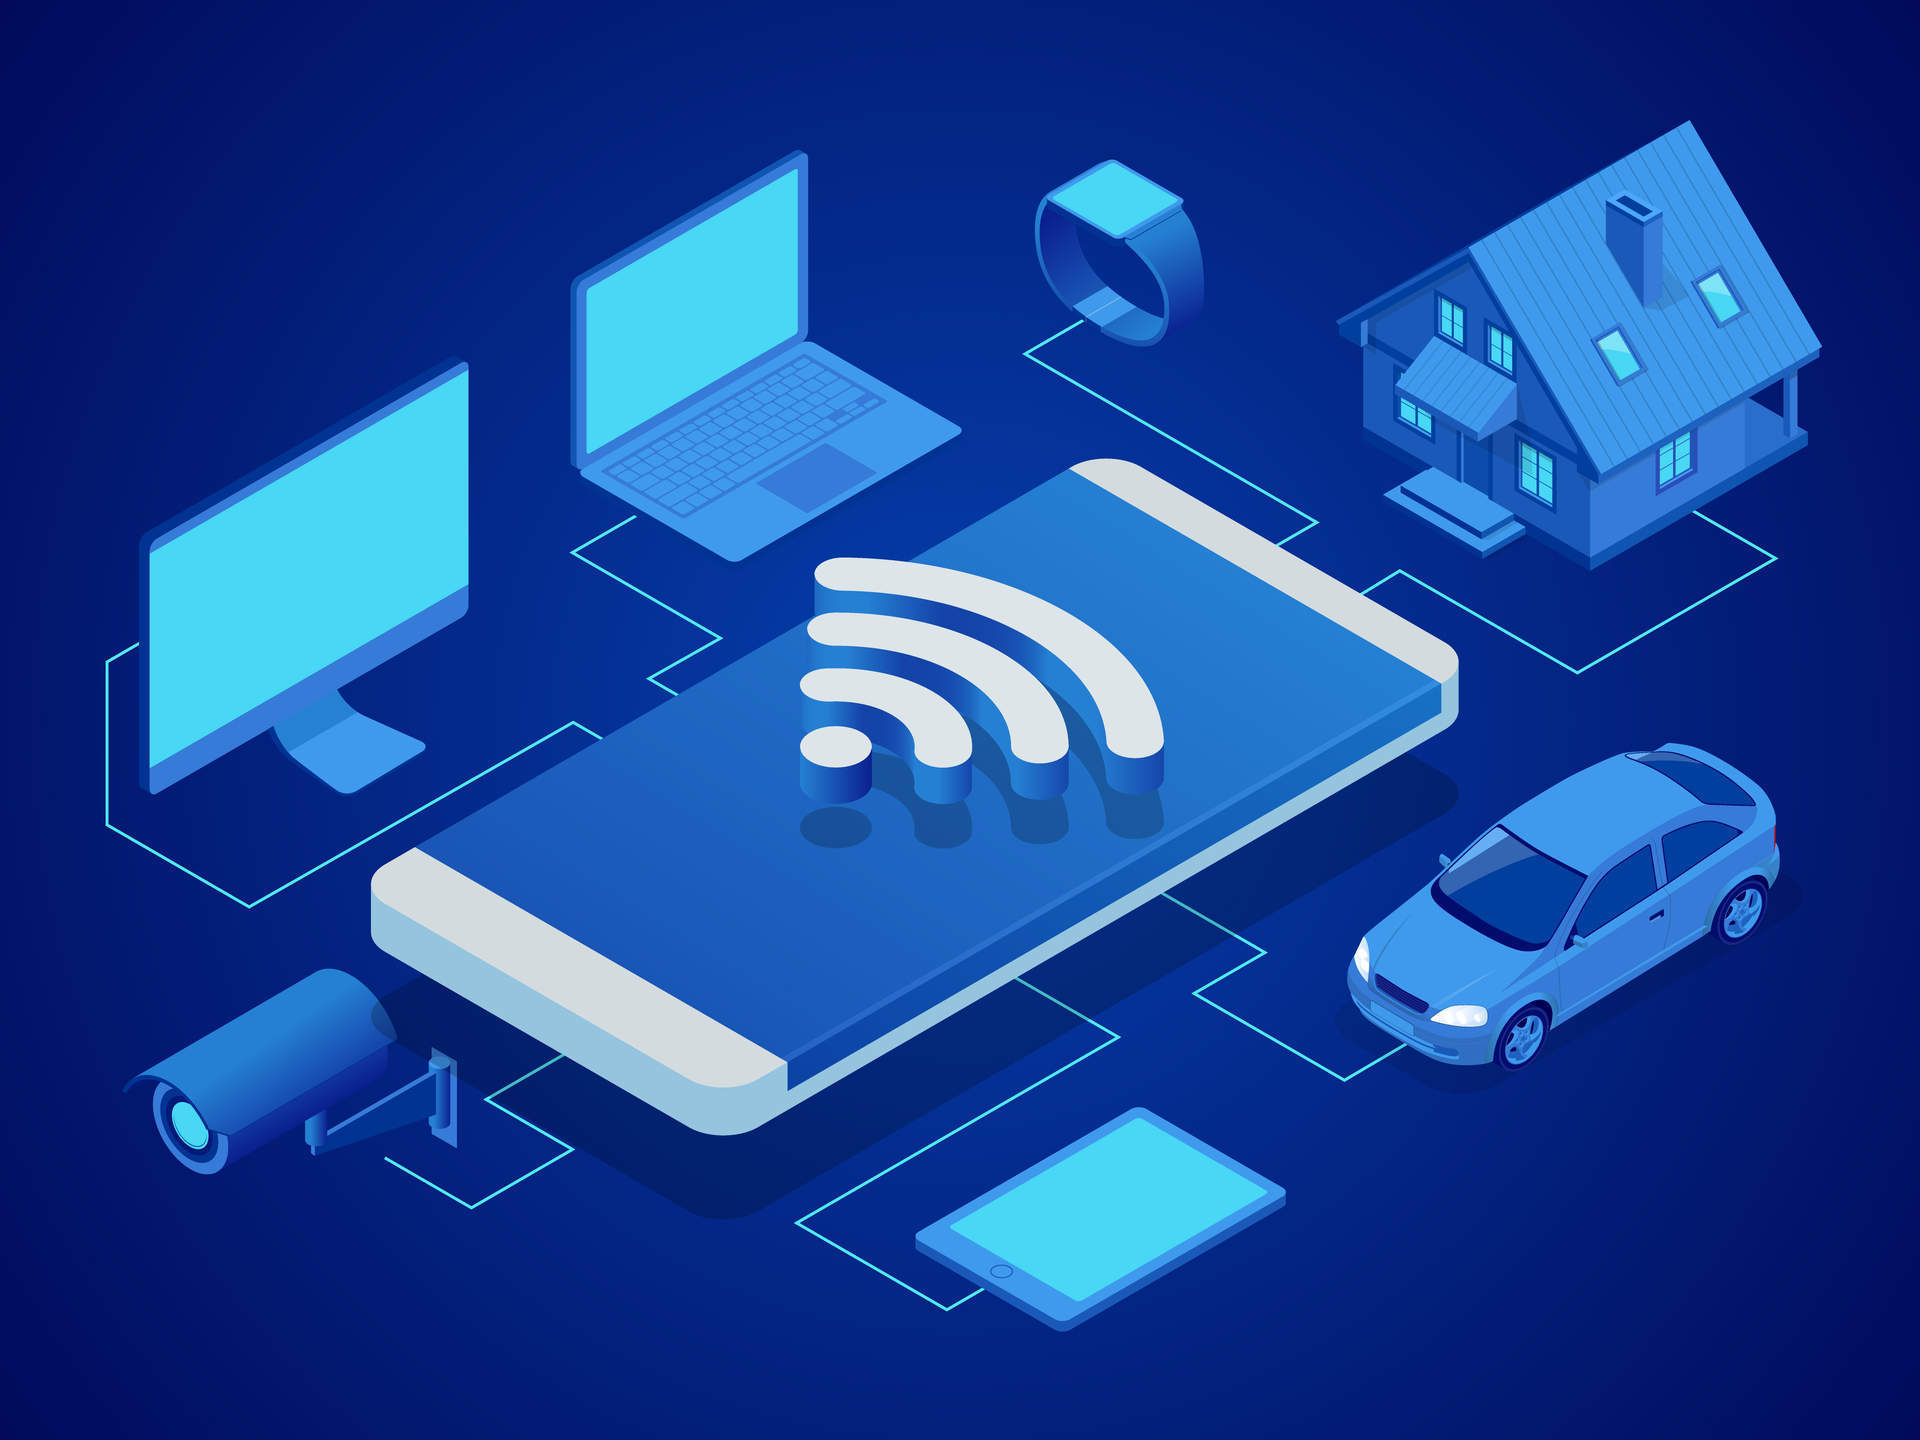 364 million homes could soon have multi-AP WiFi